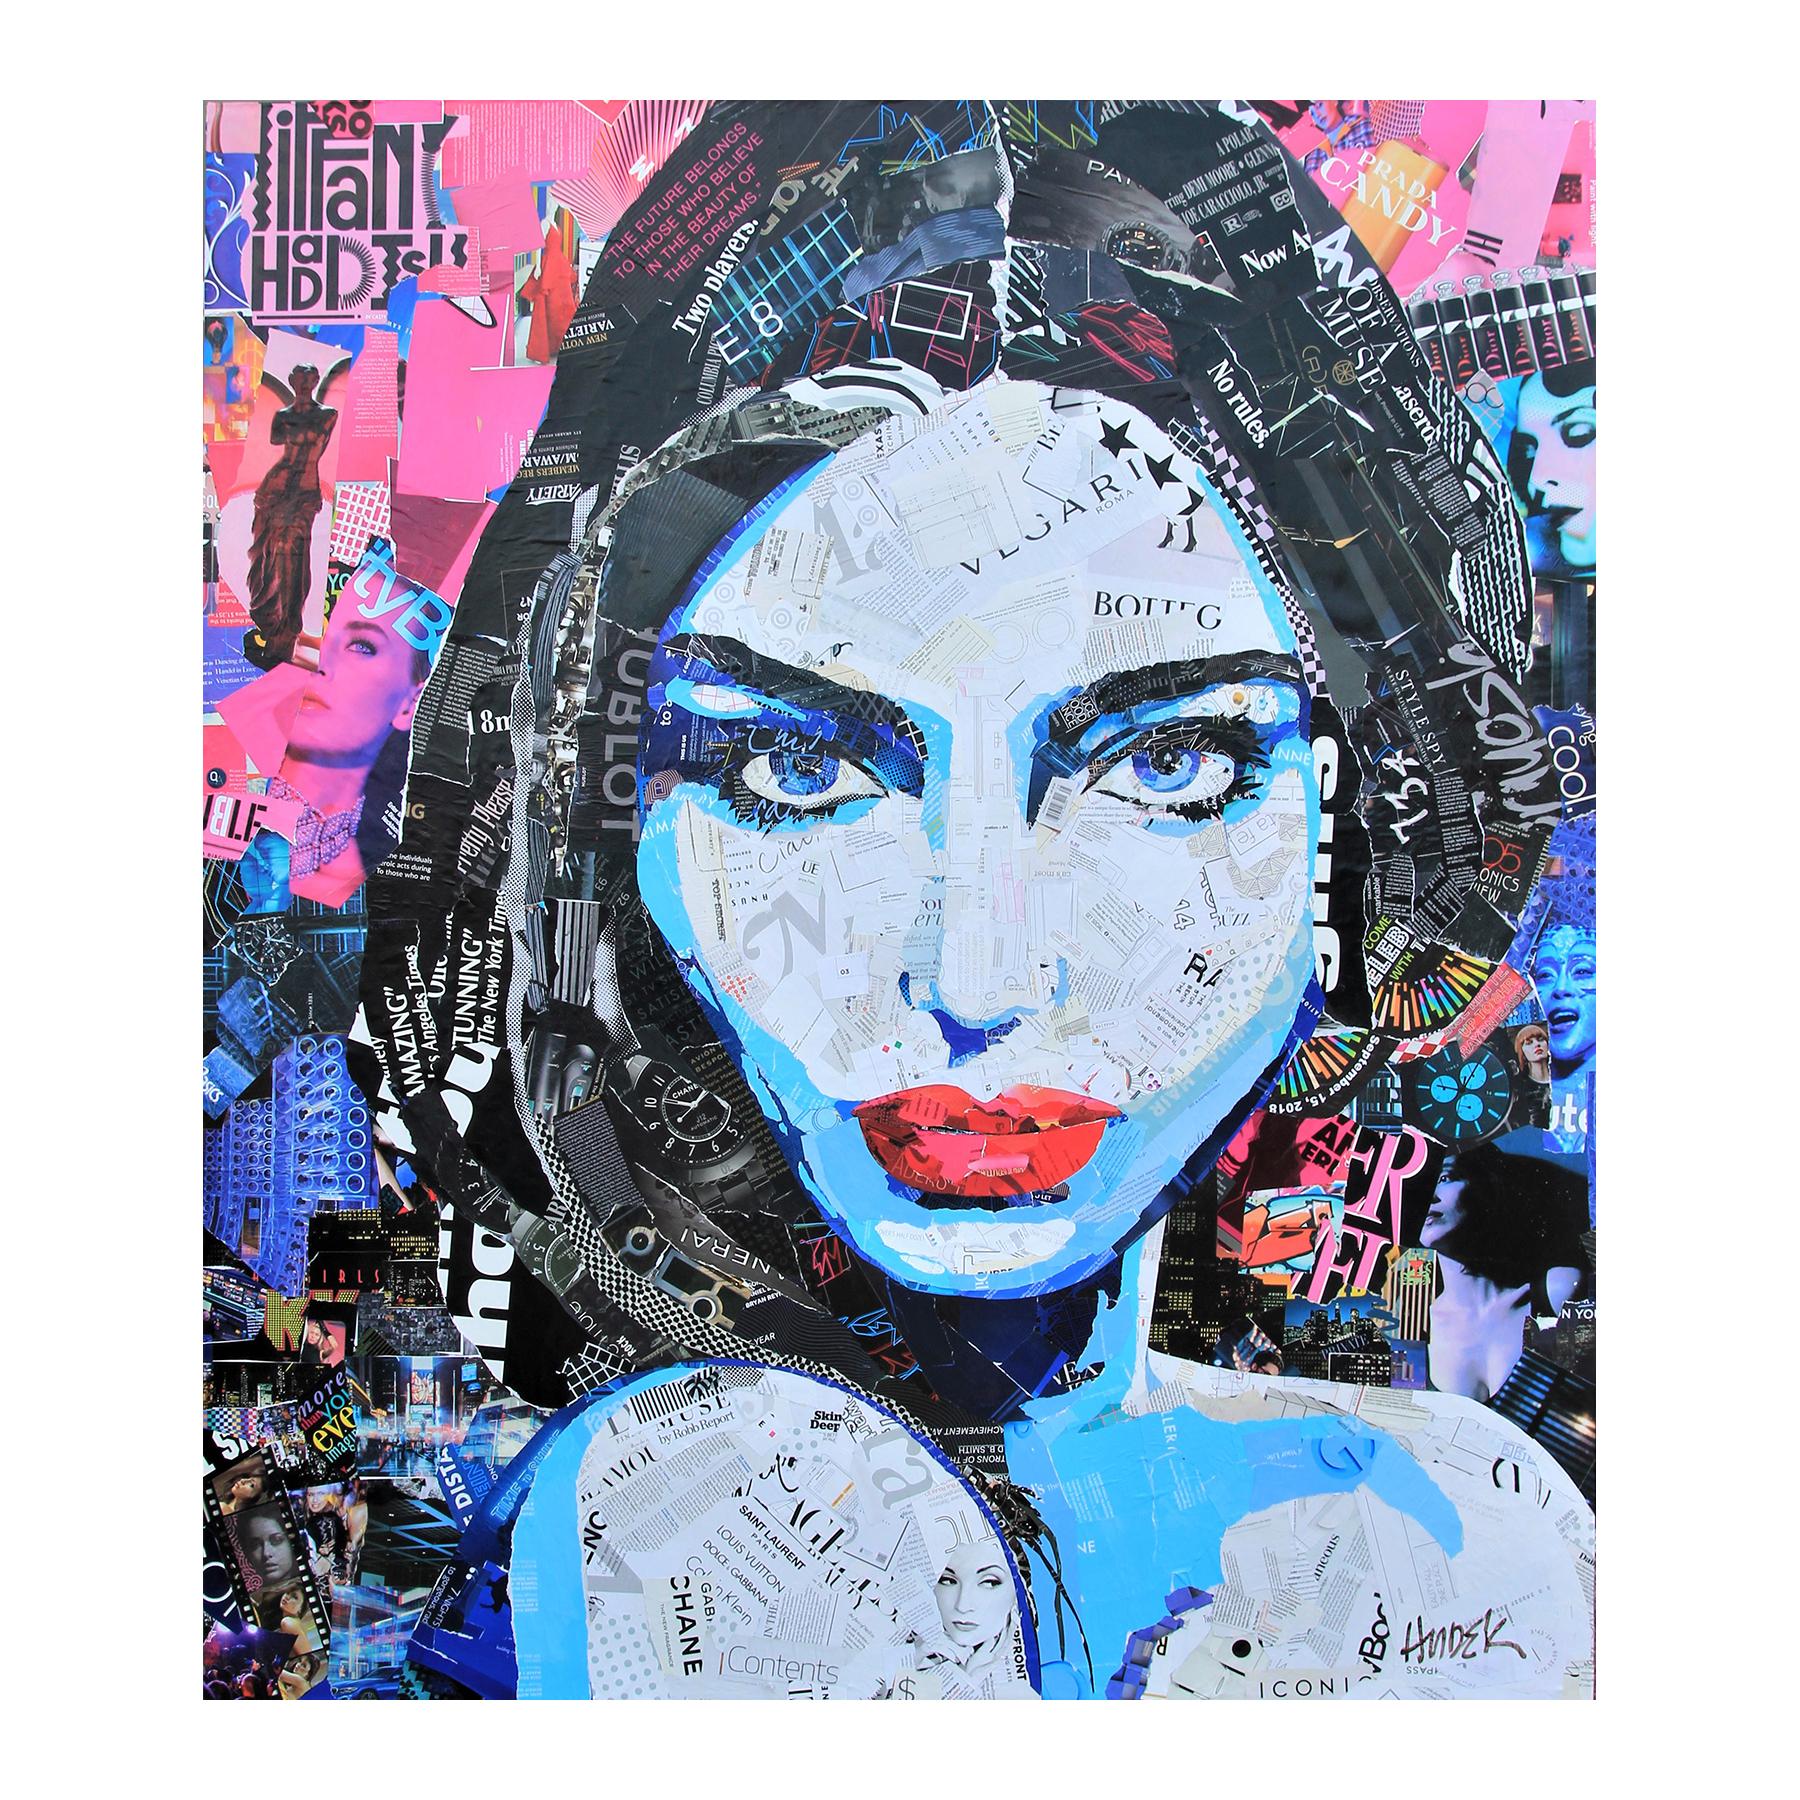 "I'm Here for the Soiree" Blue & Pink Toned Pop Art Mixed Media Collage Portrait